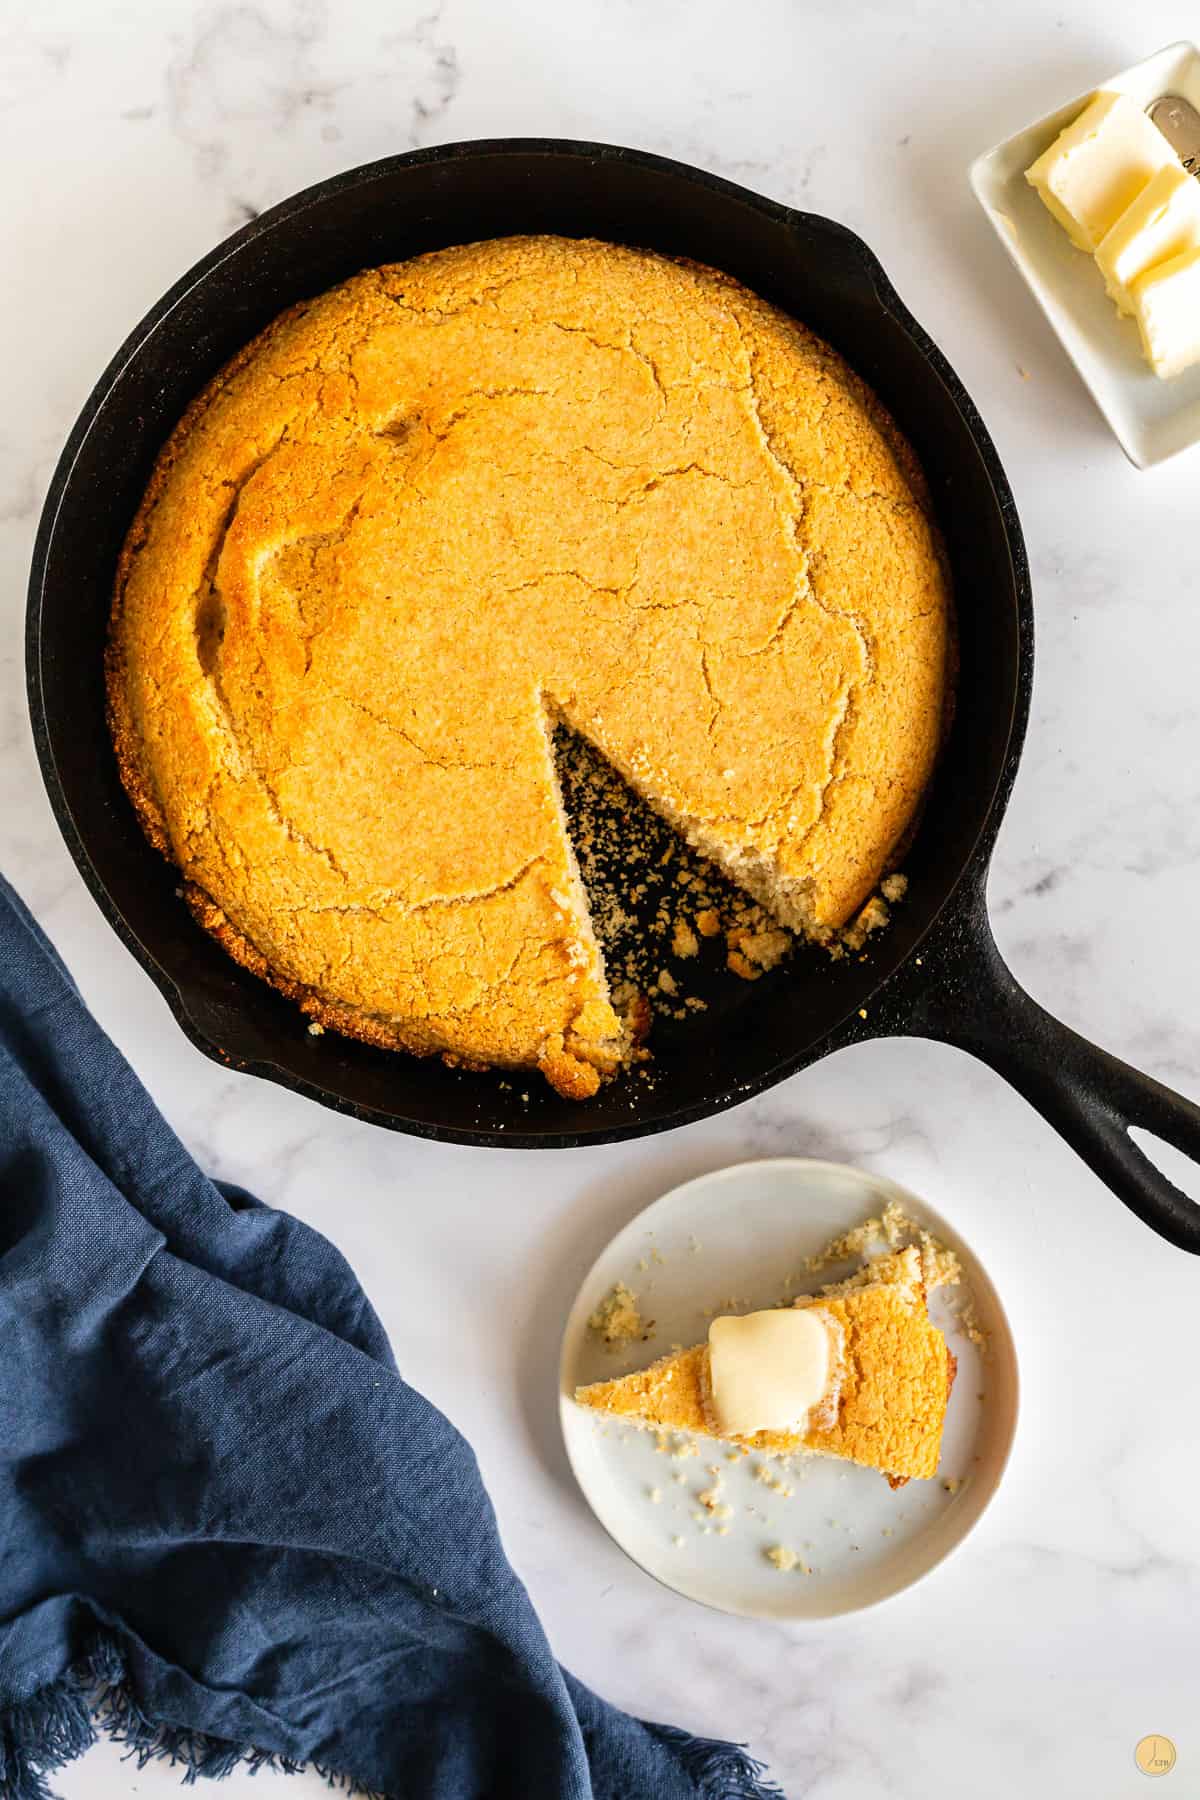 Top view of skillet with cornbread in it on a table, a slice cut out and is on a small white plate on the table next to it with butter on top.